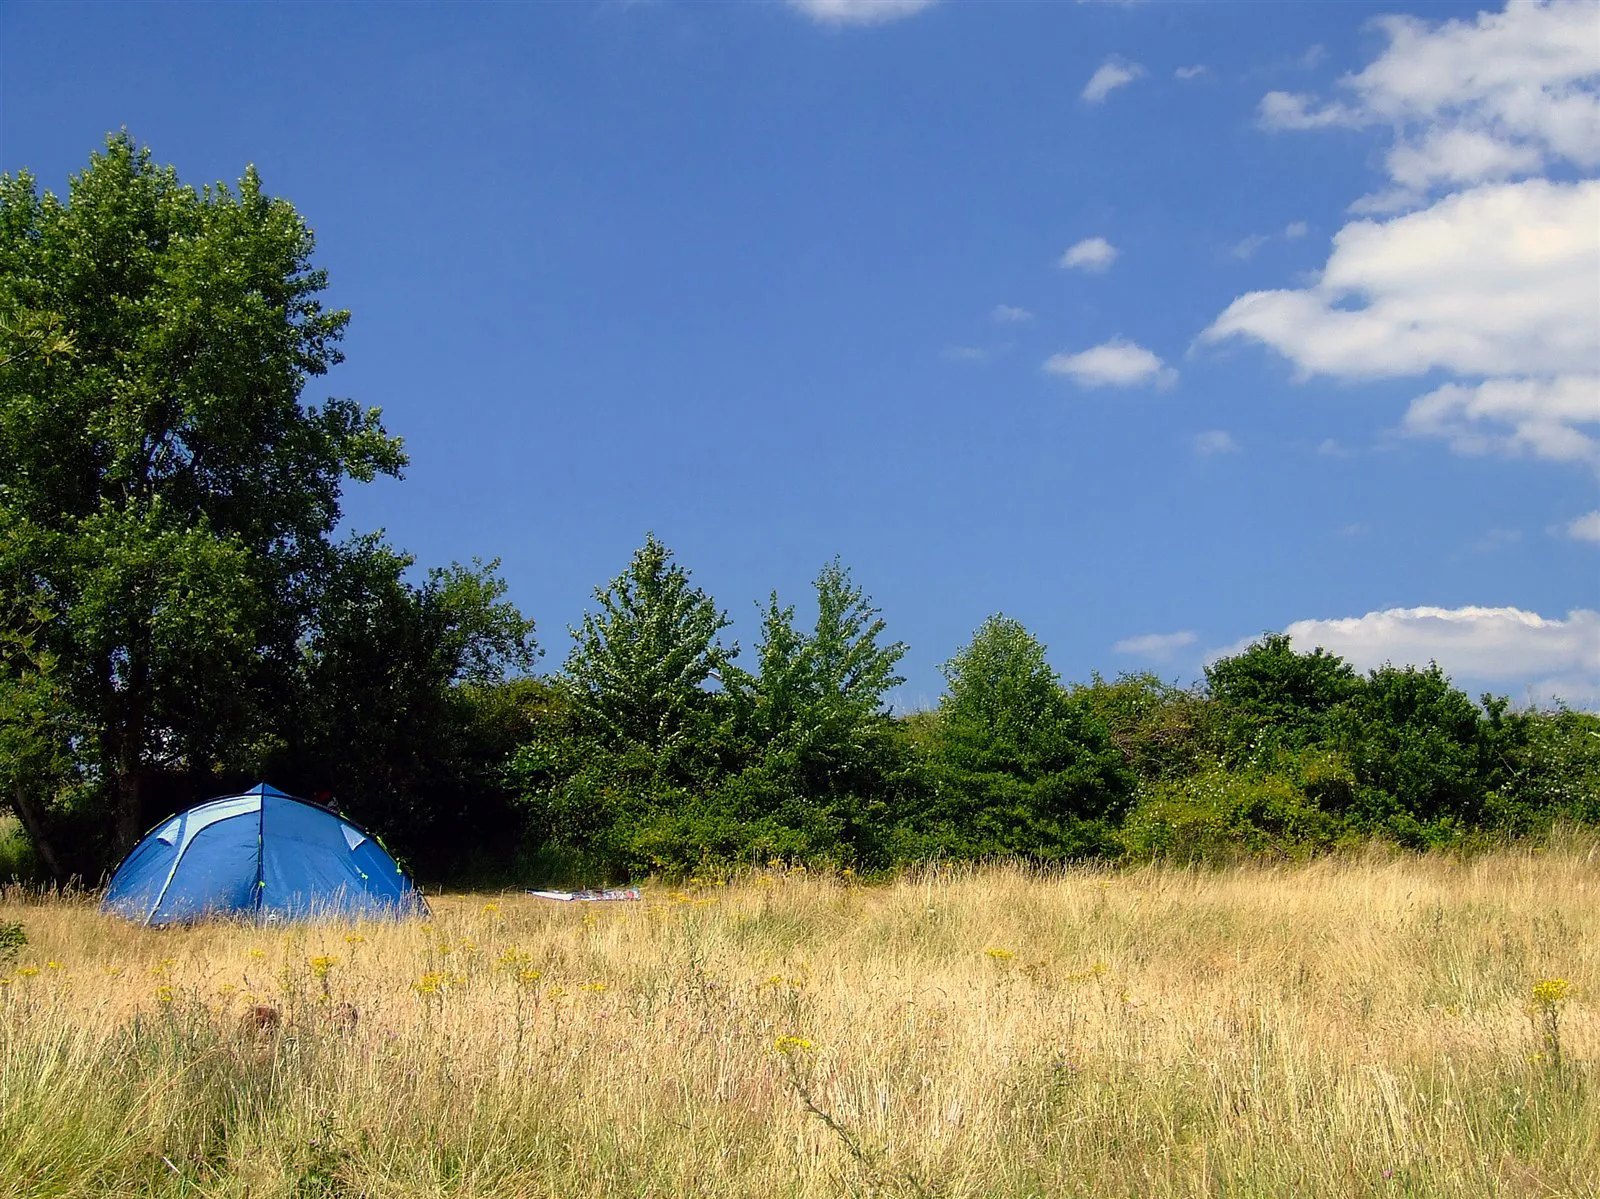 Wild camping within organised campsites